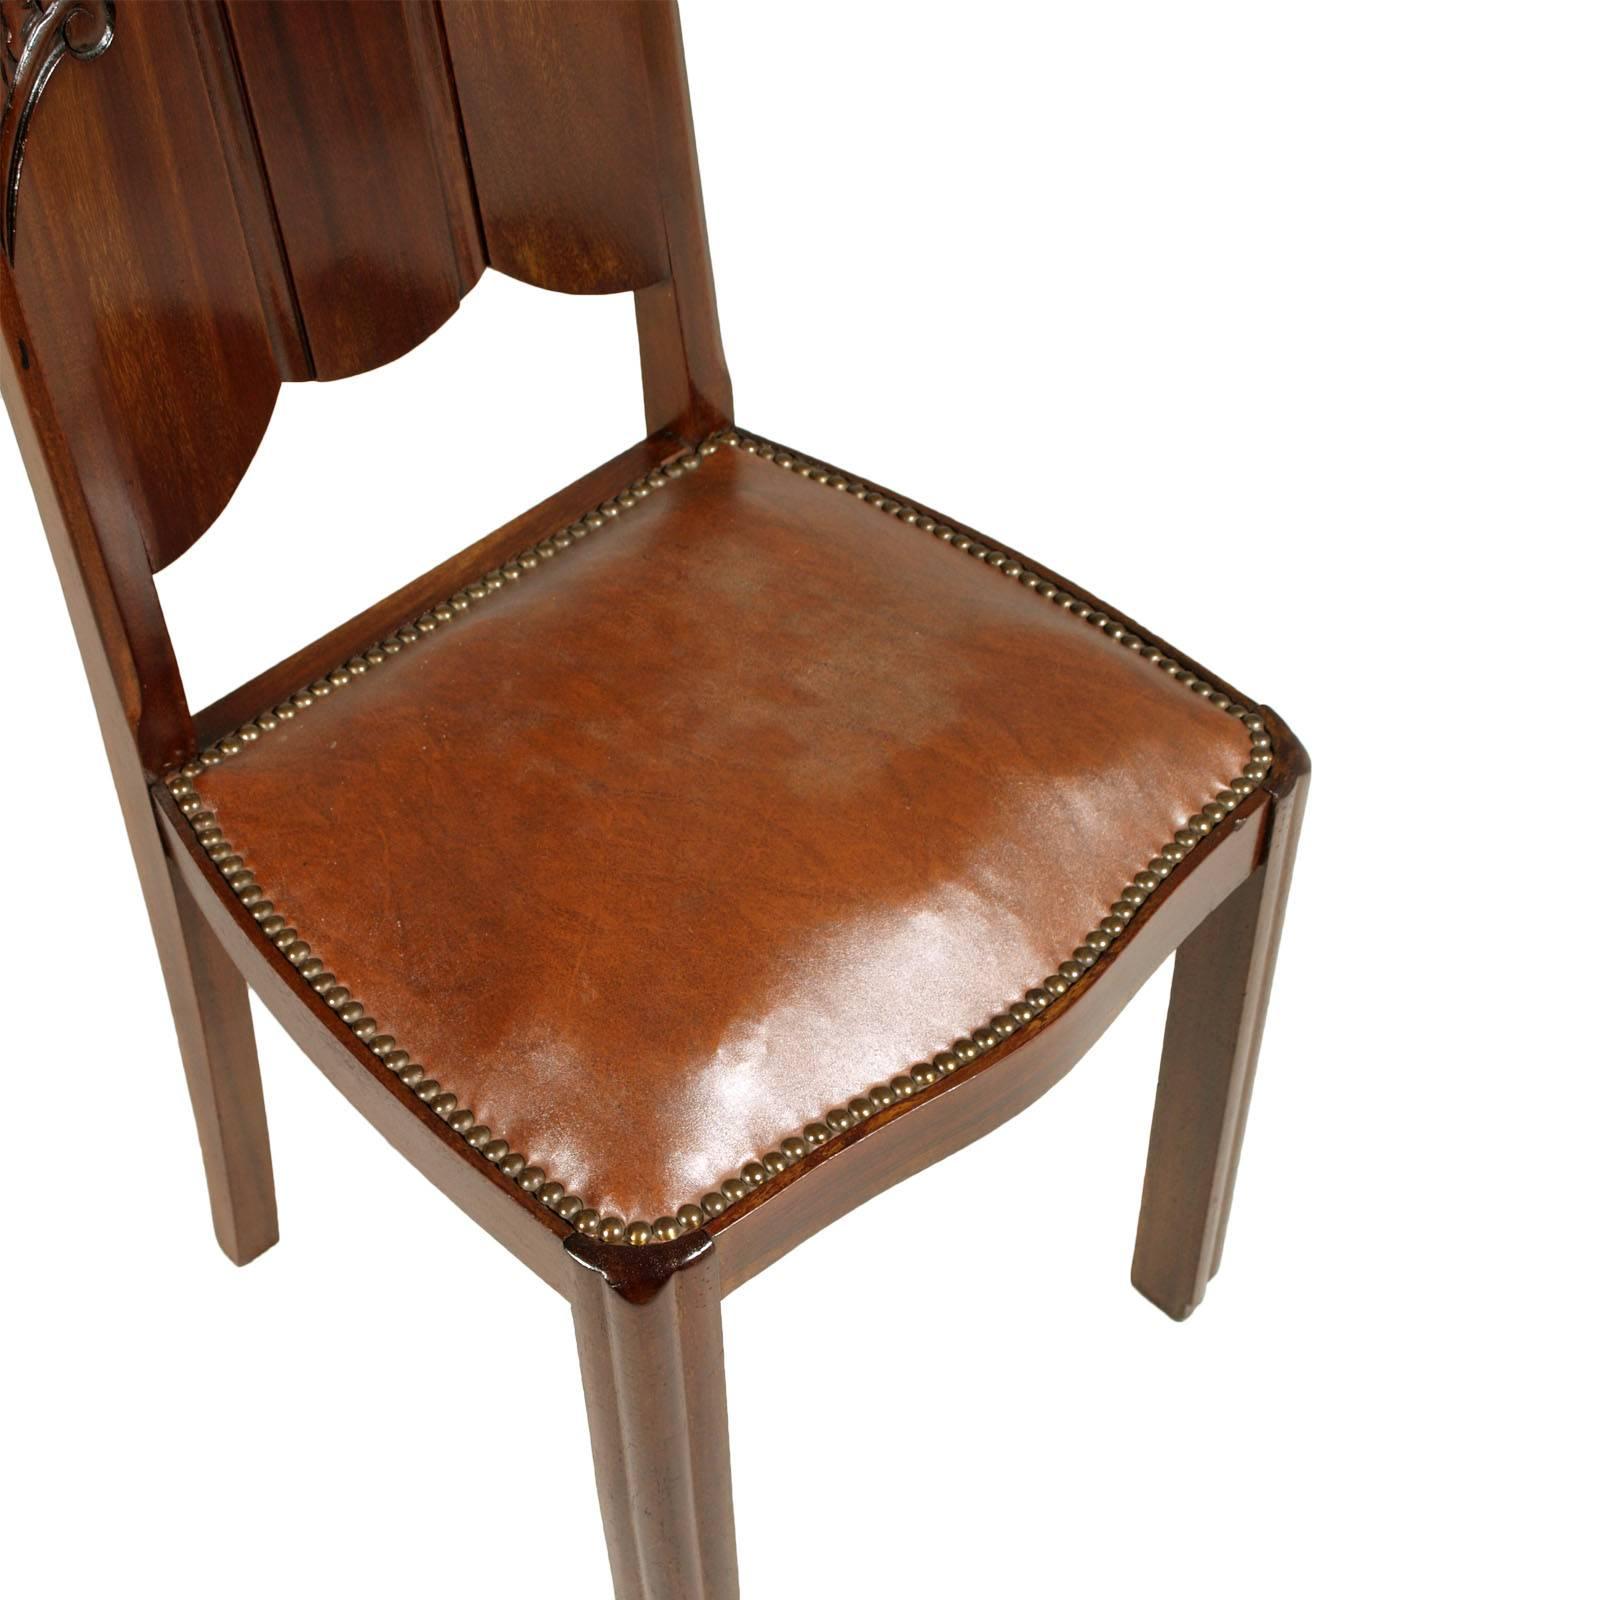 Hand-Carved Early 20th Century French Art Nouveau Carved Mahogany Chair, Leatherette Seat For Sale